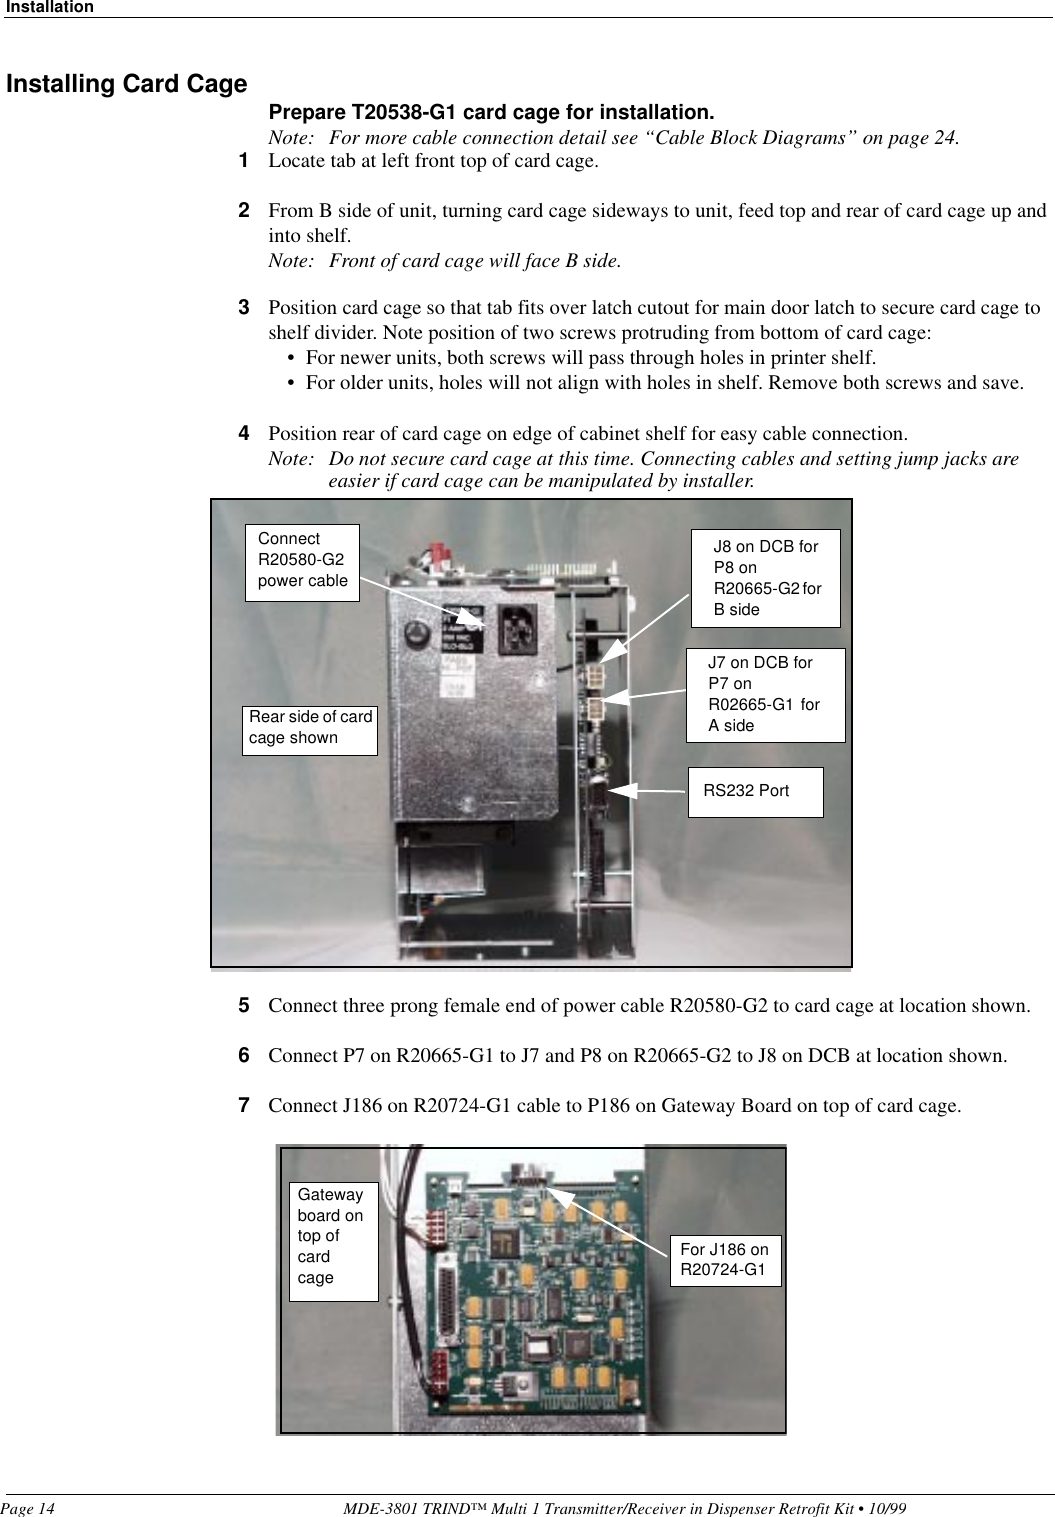 InstallationPage 14 MDE-3801 TRIND™ Multi 1 Transmitter/Receiver in Dispenser Retrofit Kit • 10/99Installing Card Cage Prepare T20538-G1 card cage for installation.Note: For more cable connection detail see “Cable Block Diagrams” on page 24.1Locate tab at left front top of card cage.2From B side of unit, turning card cage sideways to unit, feed top and rear of card cage up and into shelf.Note: Front of card cage will face B side.3Position card cage so that tab fits over latch cutout for main door latch to secure card cage to shelf divider. Note position of two screws protruding from bottom of card cage:• For newer units, both screws will pass through holes in printer shelf.• For older units, holes will not align with holes in shelf. Remove both screws and save. 4Position rear of card cage on edge of cabinet shelf for easy cable connection.Note: Do not secure card cage at this time. Connecting cables and setting jump jacks are easier if card cage can be manipulated by installer.5Connect three prong female end of power cable R20580-G2 to card cage at location shown.6Connect P7 on R20665-G1 to J7 and P8 on R20665-G2 to J8 on DCB at location shown.7Connect J186 on R20724-G1 cable to P186 on Gateway Board on top of card cage.J8 on DCB for P8 on R20665-G2 for B sideJ7 on DCB for P7 on R02665-G1  for A sideRS232 PortRear side of card cage shownConnect R20580-G2 power cableFor J186 on R20724-G1Gateway board on top of card cage